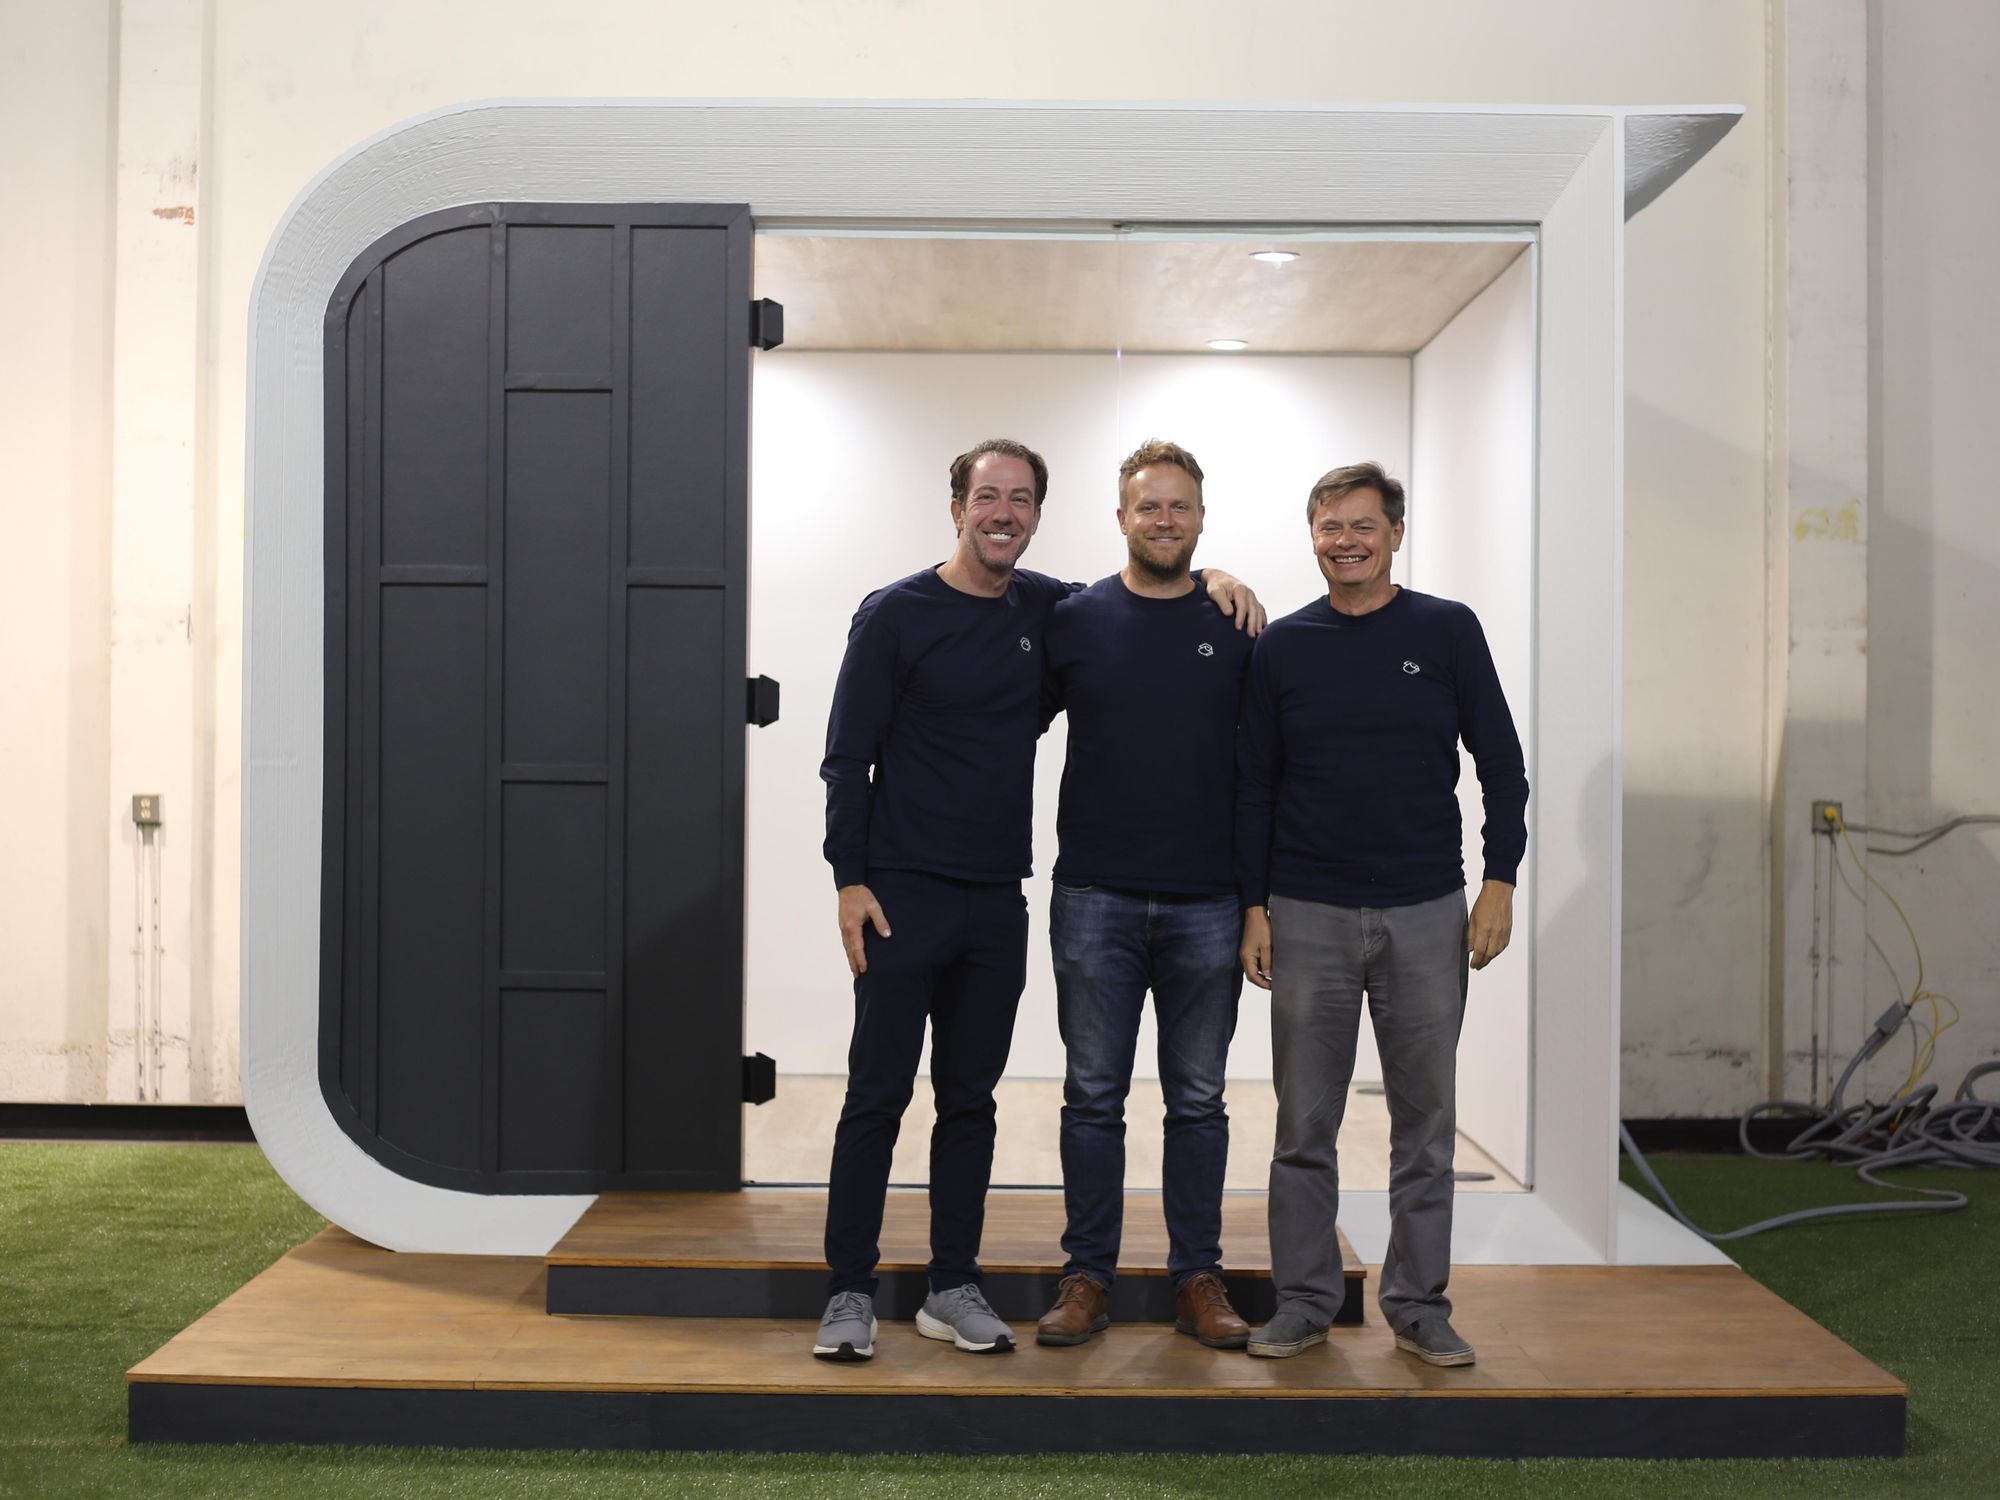 Meet the Culver City Startup Looking to 3D-Print ADUs in Under 24 Hours